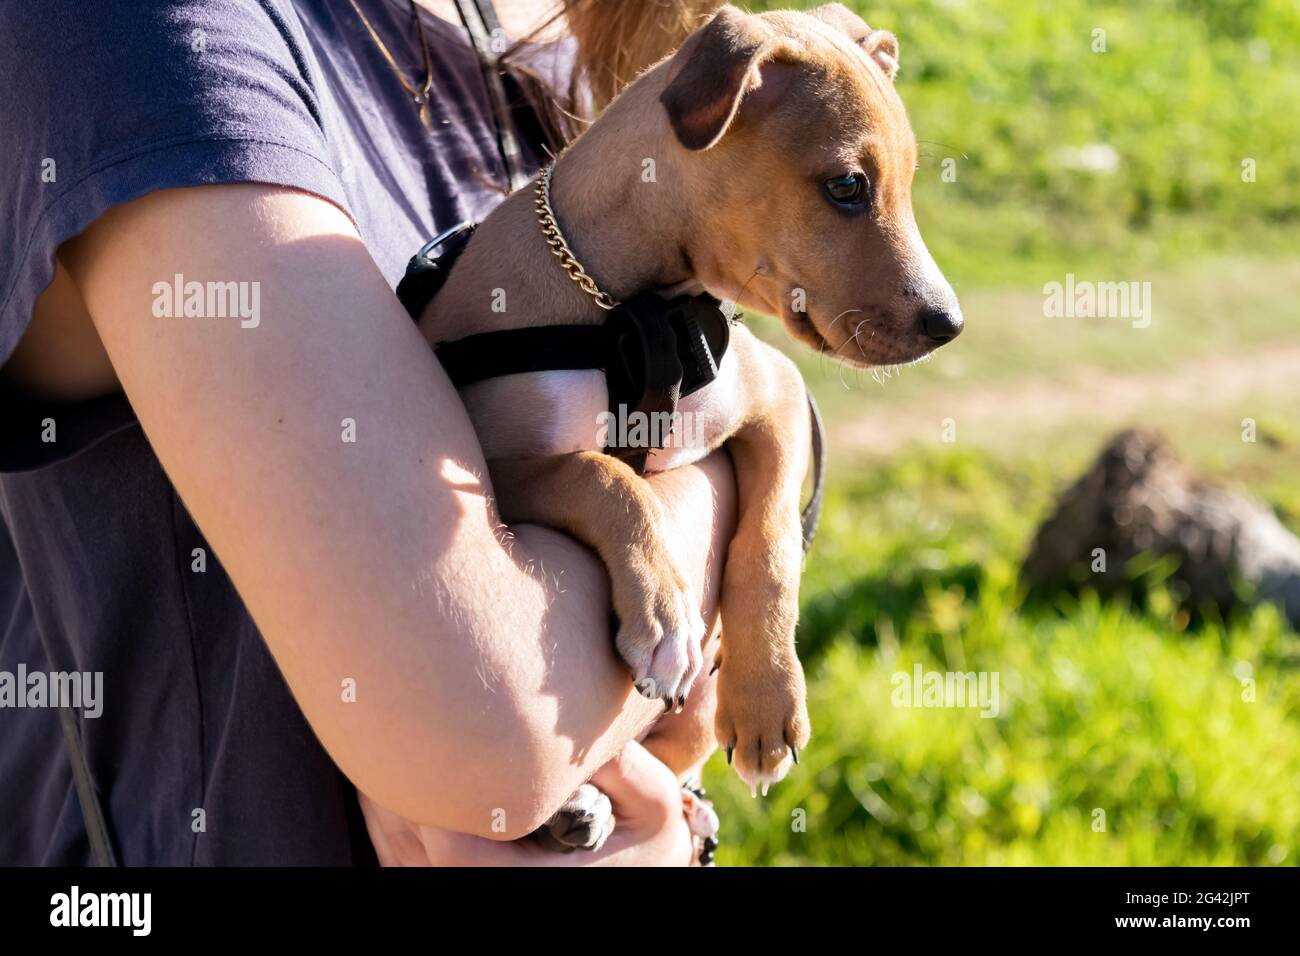 Close up of a brown half-breed puppy being carried by a Caucasian person, they are located to the left of the photo so the dog is looking to the right Stock Photo